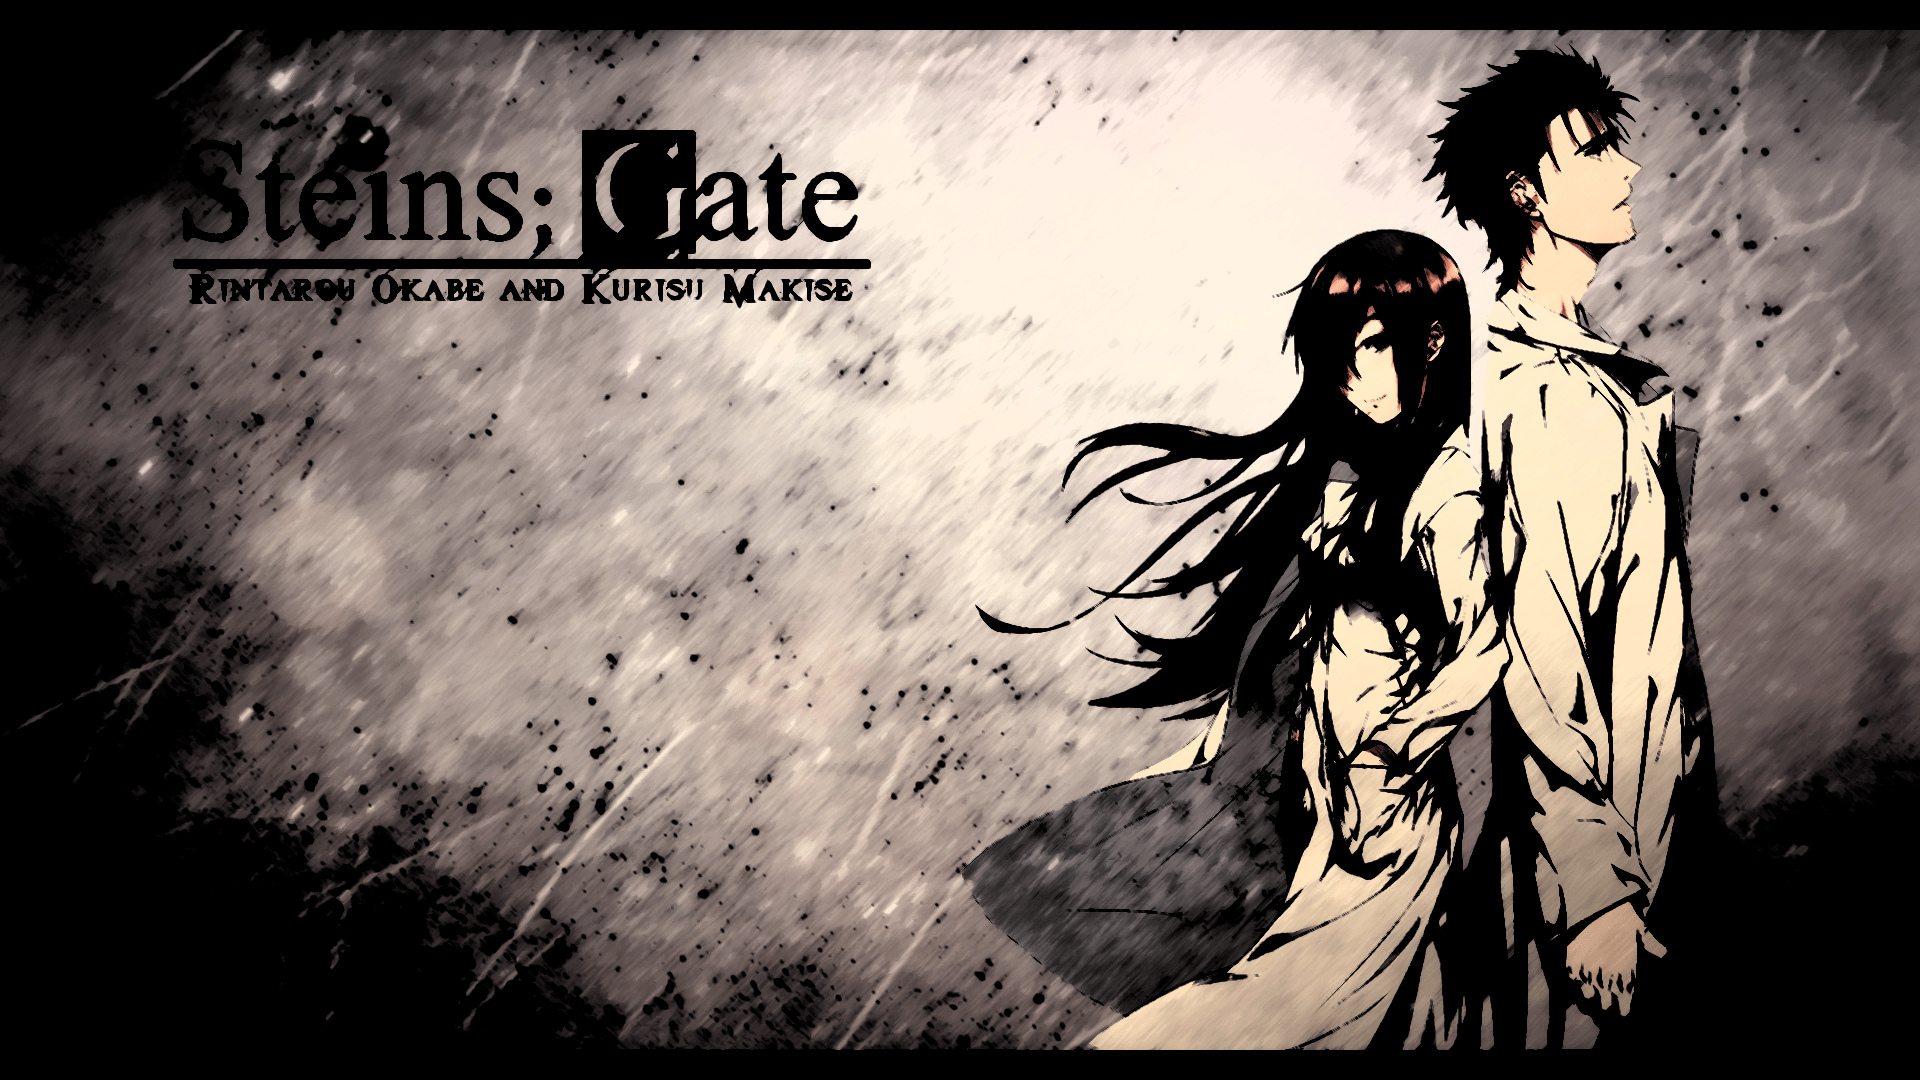 Steins Gate Wallpapers Top Free Steins Gate Backgrounds Wallpaperaccess